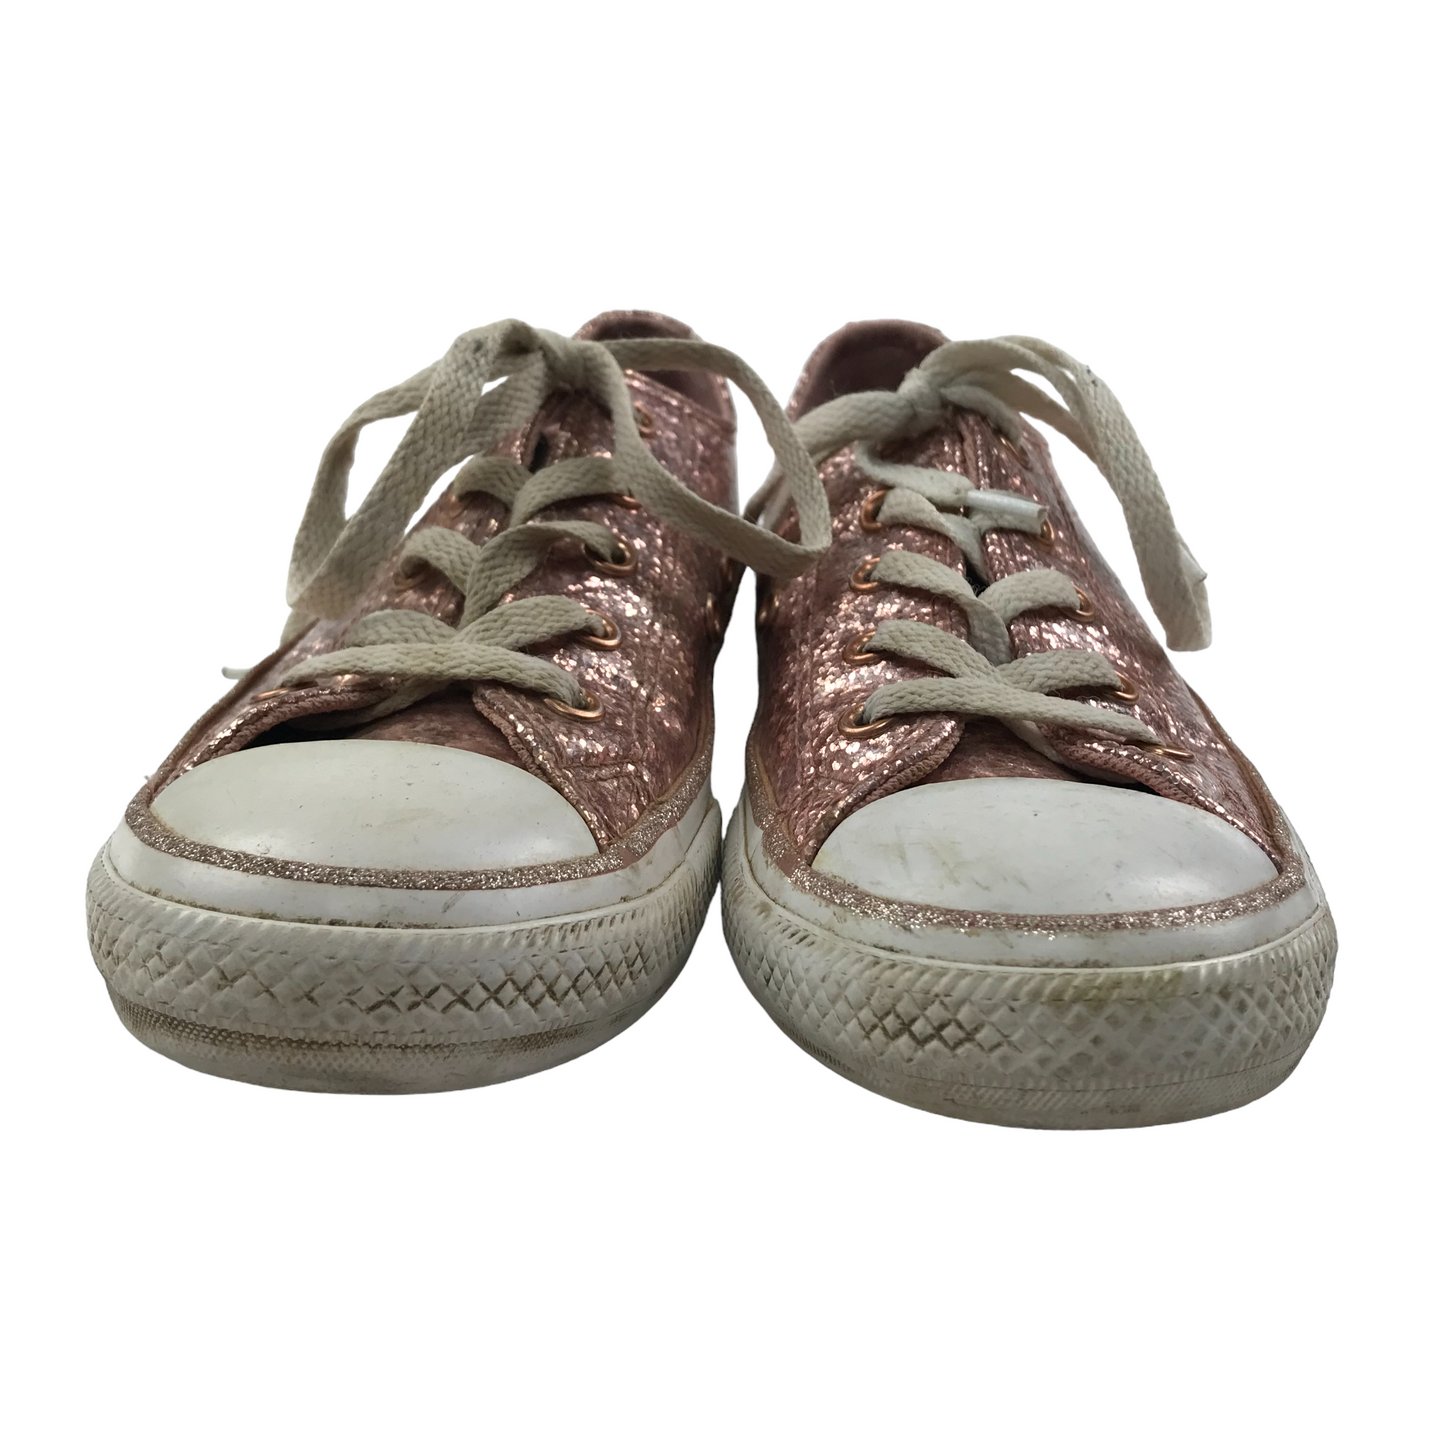 Converse All Stars Glittery Pink Trainers Shoe Size 13 junior